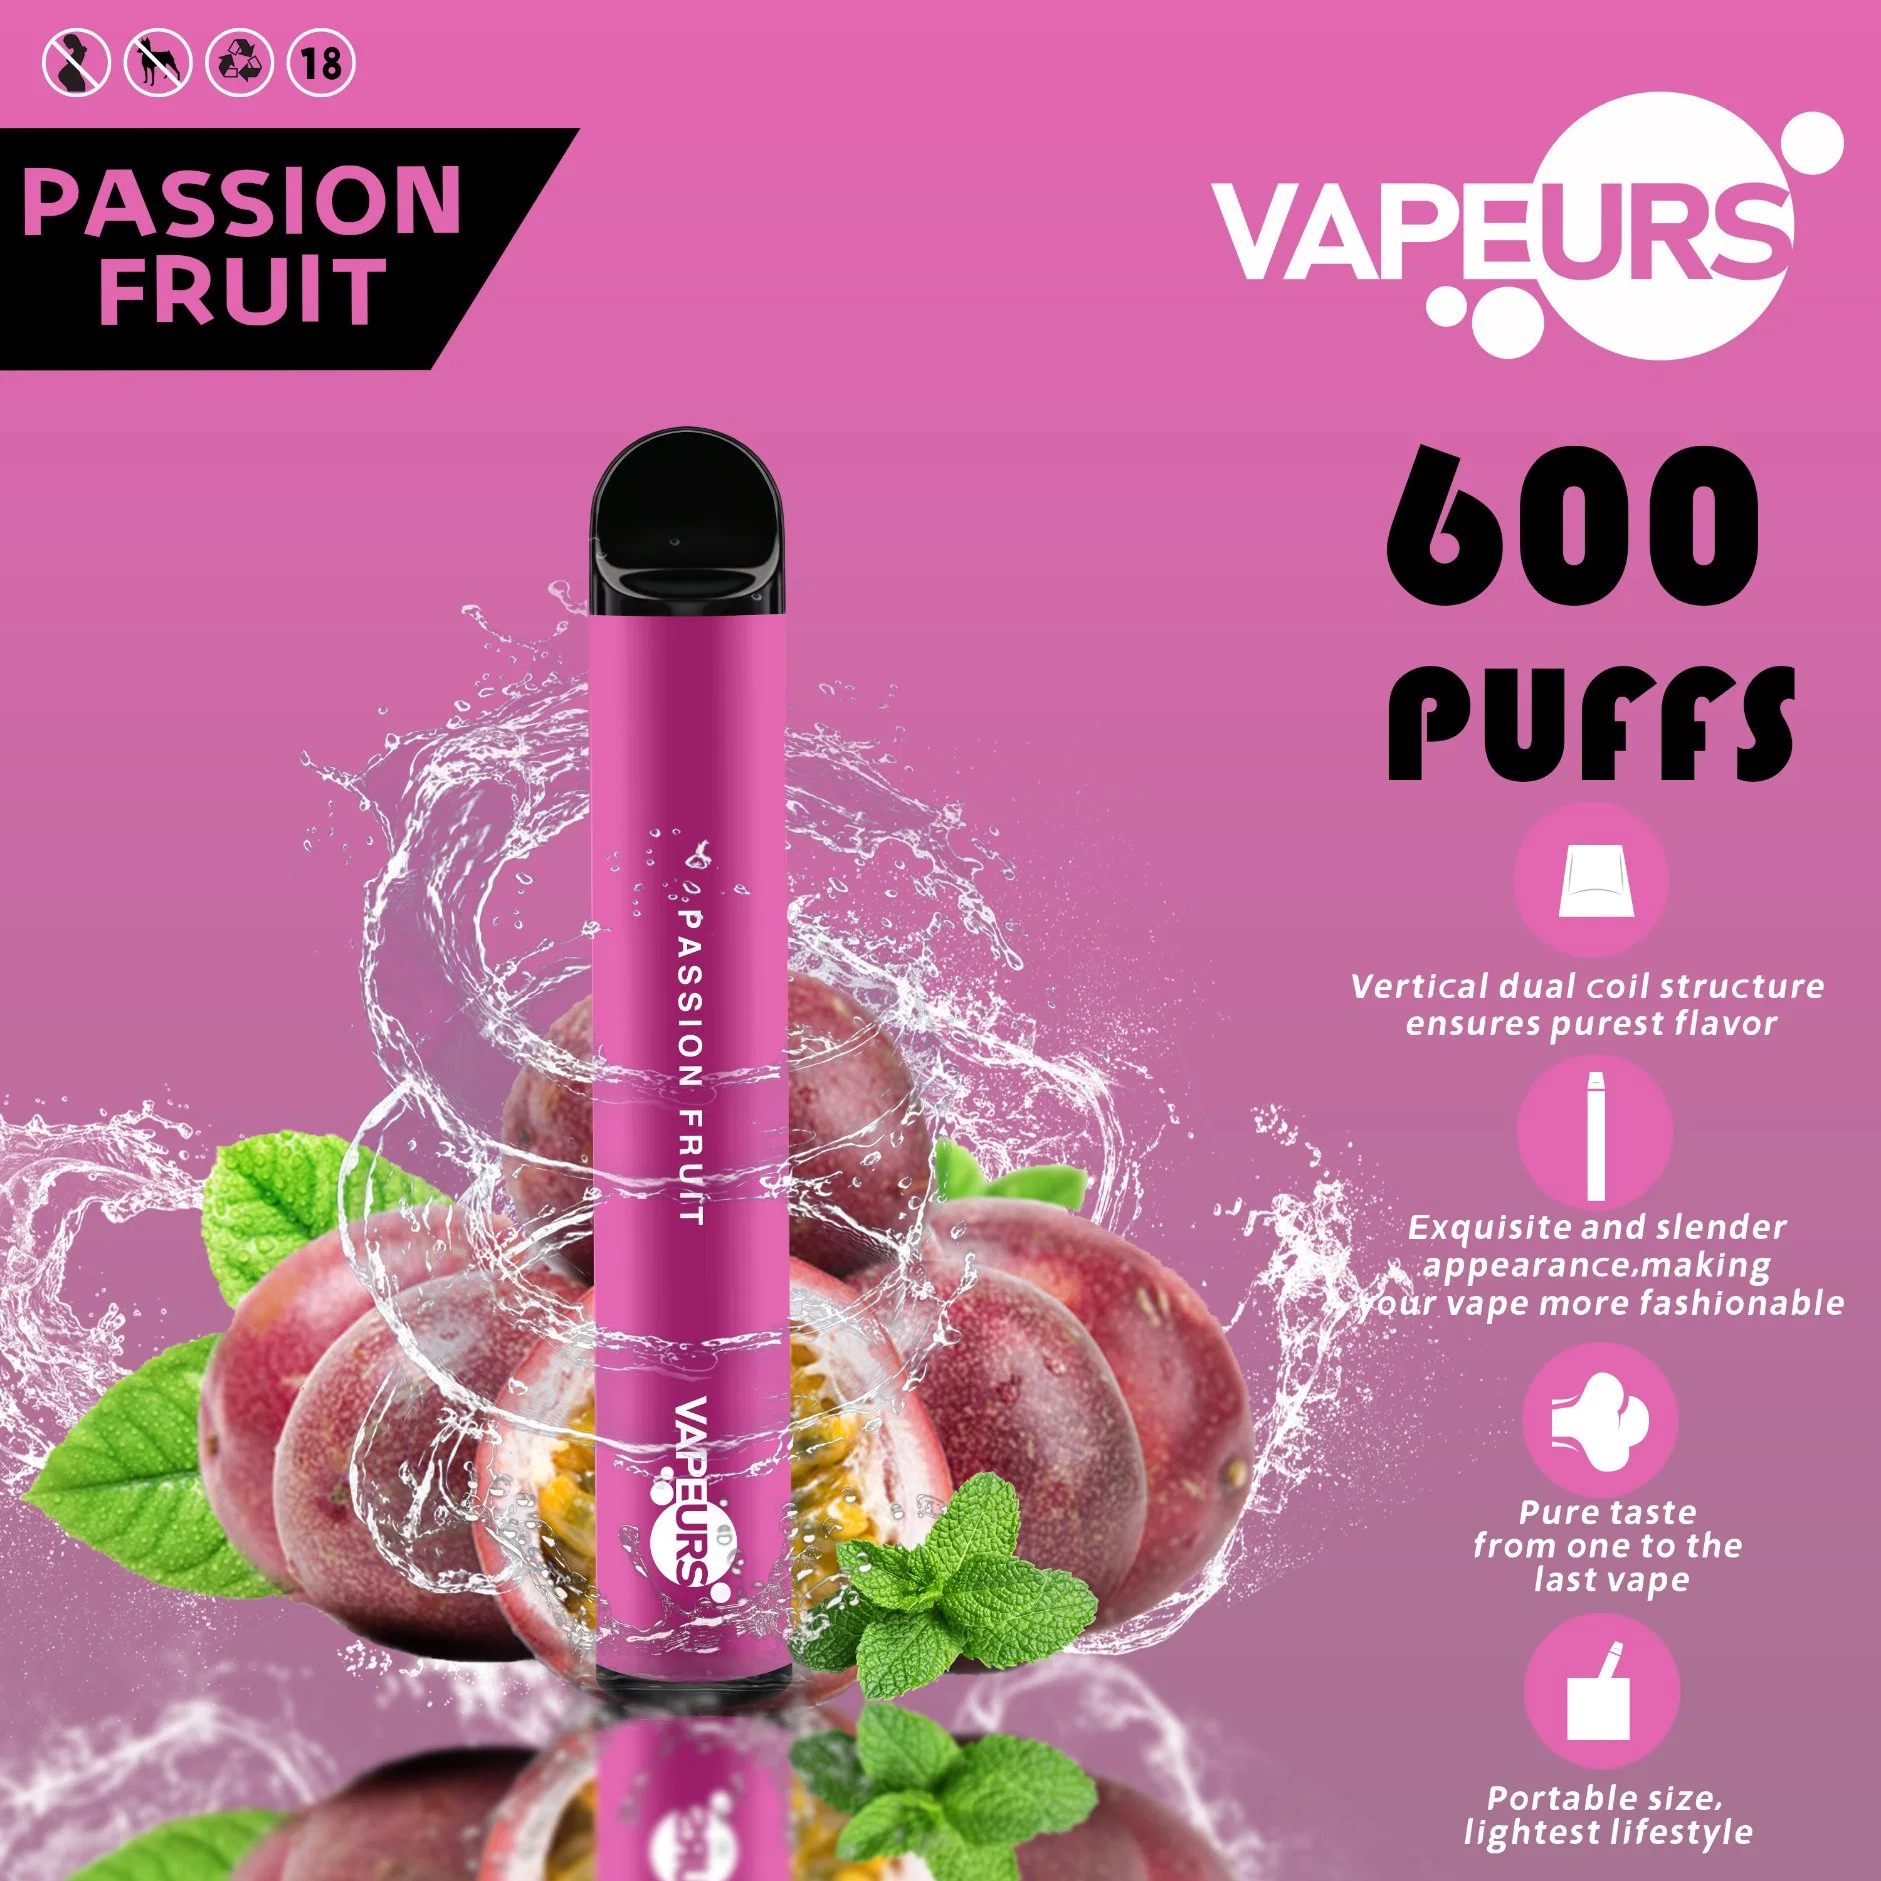 up to 600 Puffs Passion Fruit Flavor Vapes 0-5% Nicotine Strength E Cigarette Multi Languages Packaging Disposable/Chargeable Vape High quality/High cost performance Hookah